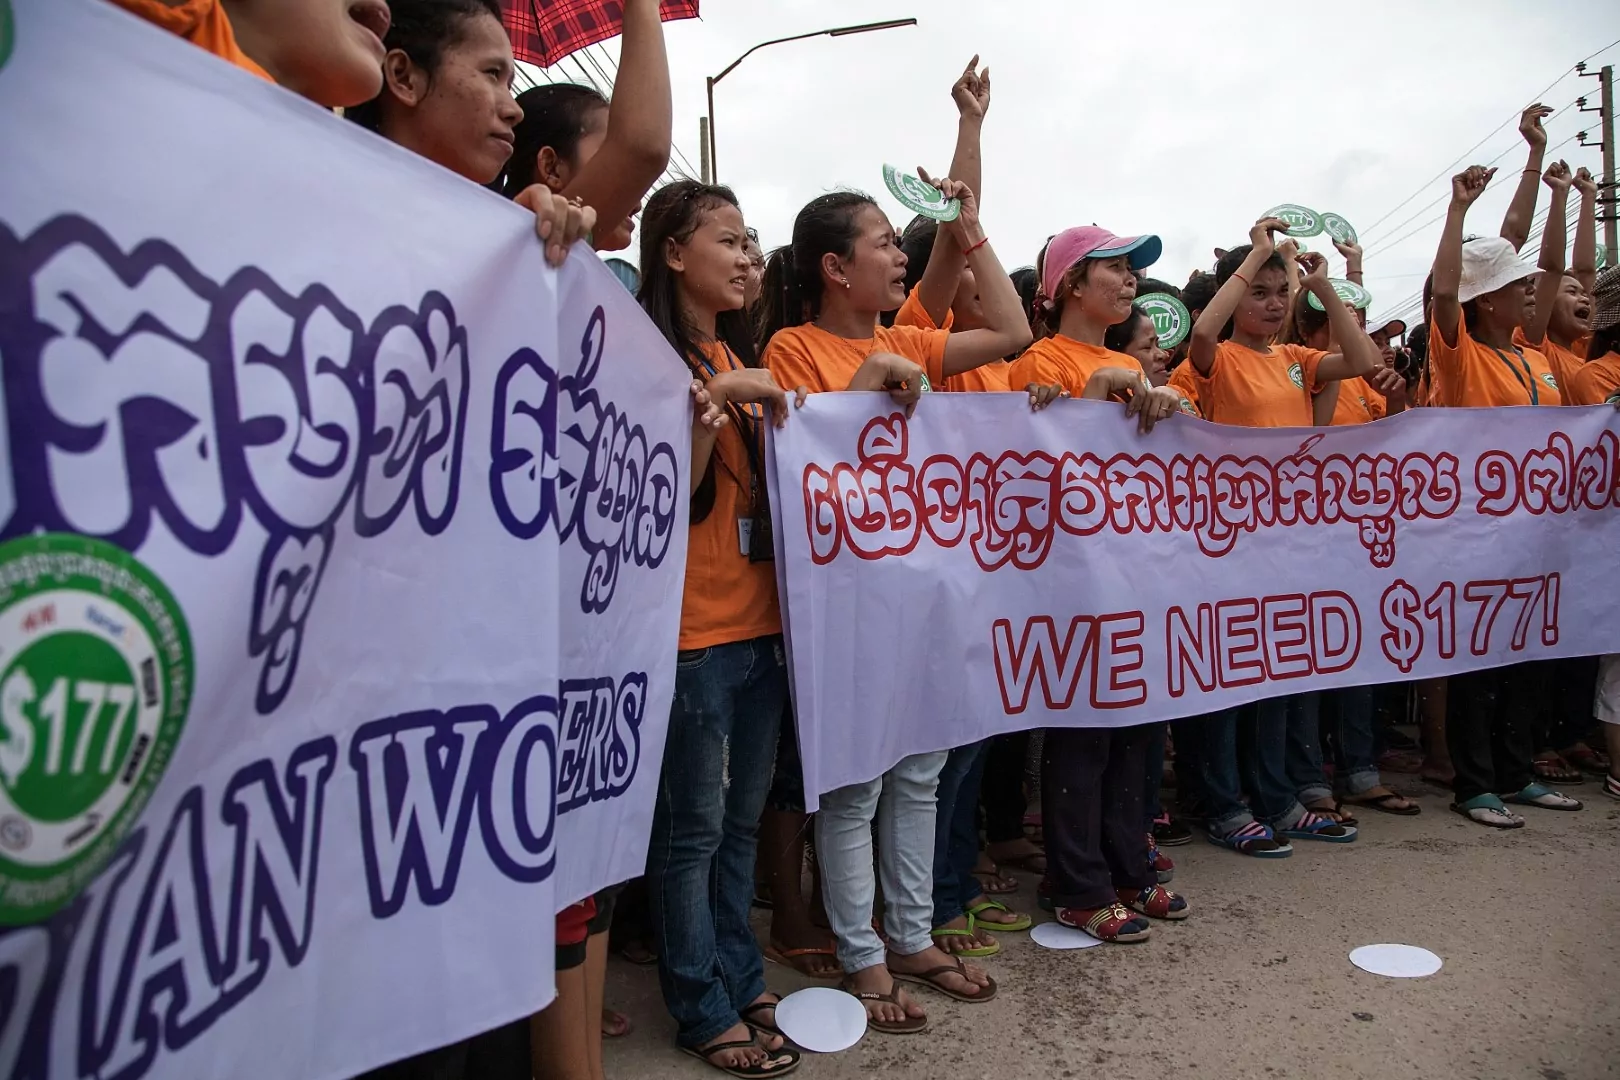 PHNOM PENH, CAMBODIA - SEPTEMBER 17: A group of garment workers demonstrate inside the Canadia Industrial Park during a protest demanding an increase of their minimum salary on September 17, 2014 in Phnom Penh, Cambodia. Thousands of garment factory workers from across Cambodia are taking part in a global day of worker solidarity. Eight of Cambodia's workers unions who are organizing today's events are handing out stickers and t-shirts bearing "USD177" - the unions' requested minimum wage - and holding speeches at up to 300 factories. The unions and workers are also asking for international brands purchasing from Cambodia - including Adidas, H&M, Gap and Zara - to support a minimum wage of USD177 per month and to commit to continue purchasing from Cambodia if this increase is implemented. (Photo by Omar Havana/Getty Images)